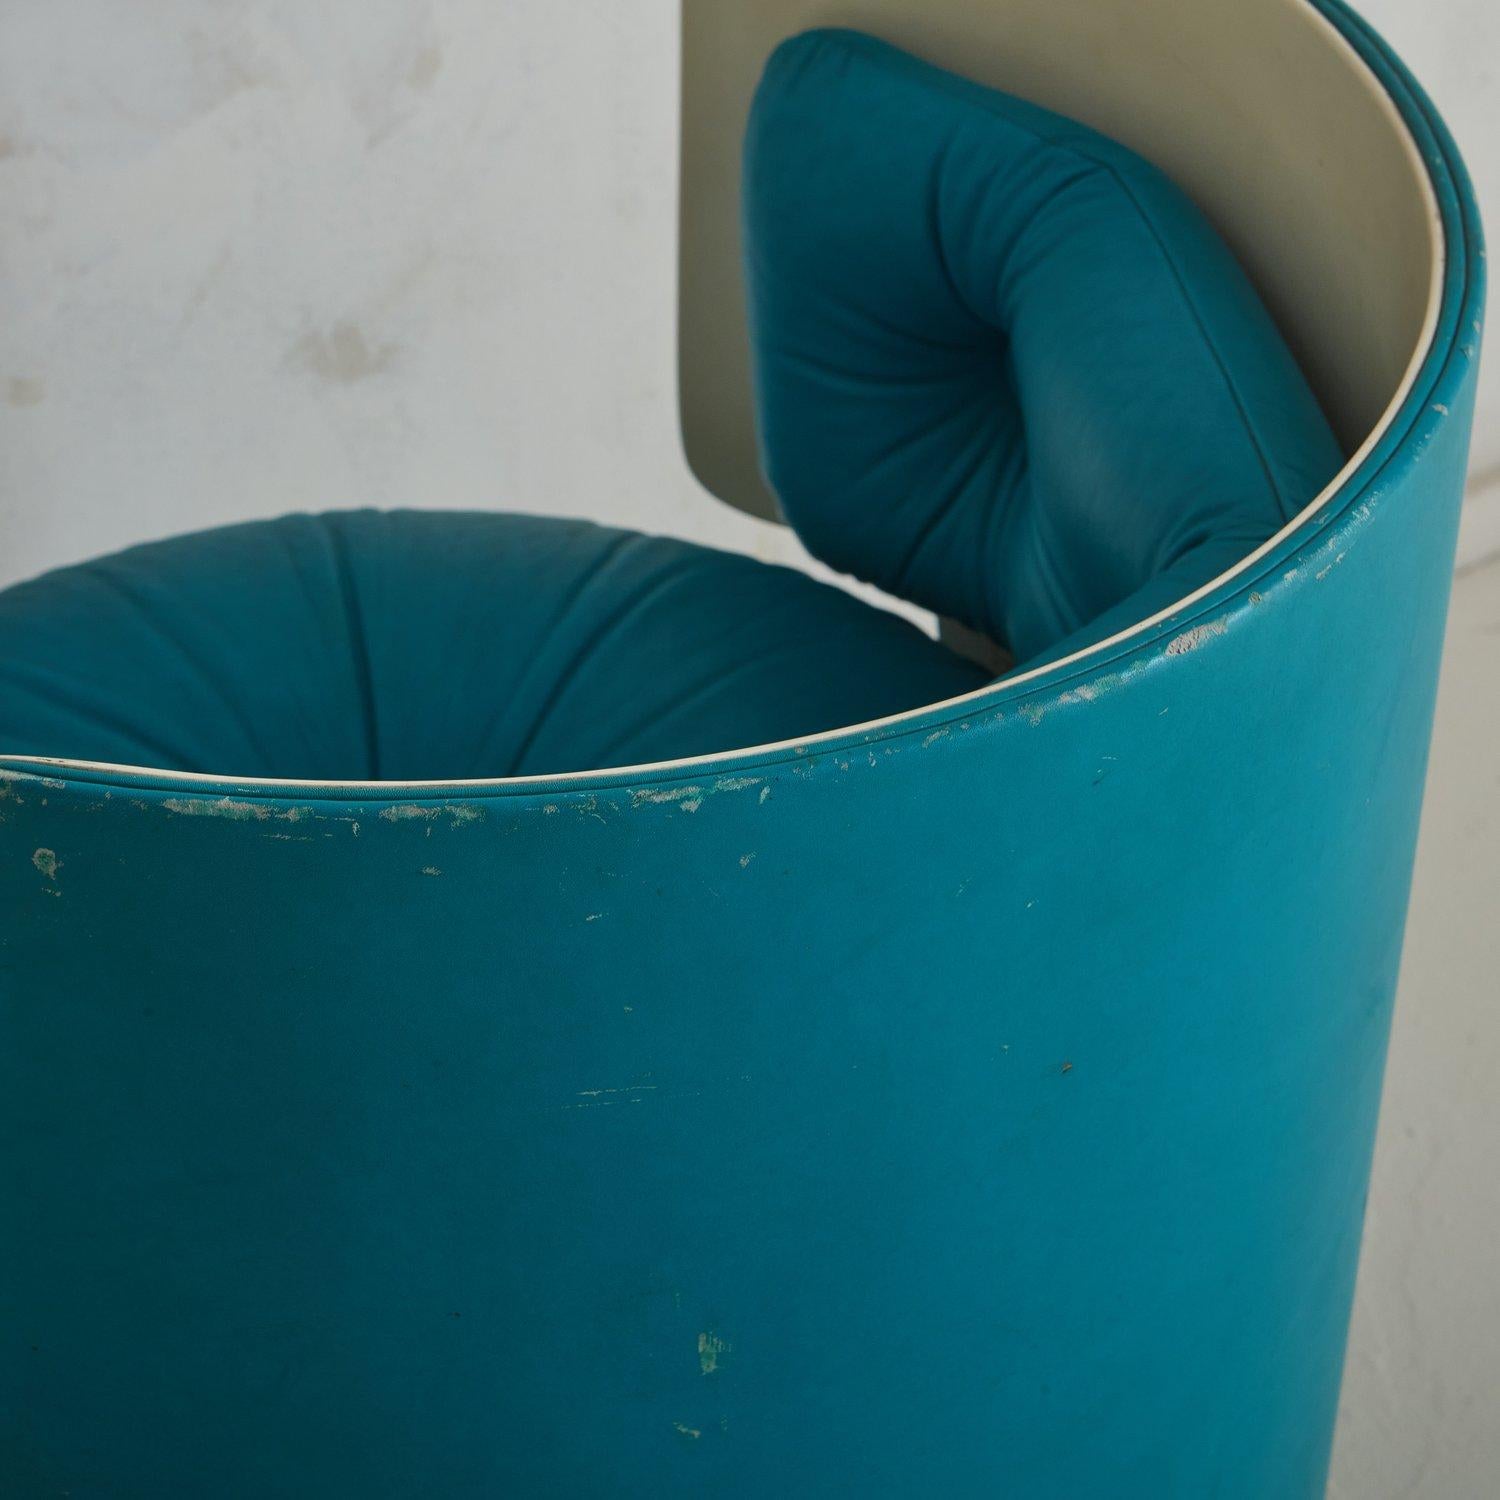 Blue ‘Dilly Dally’ Chair by Luigi Massoni for Poltrona Frau, Italy 1968 For Sale 1